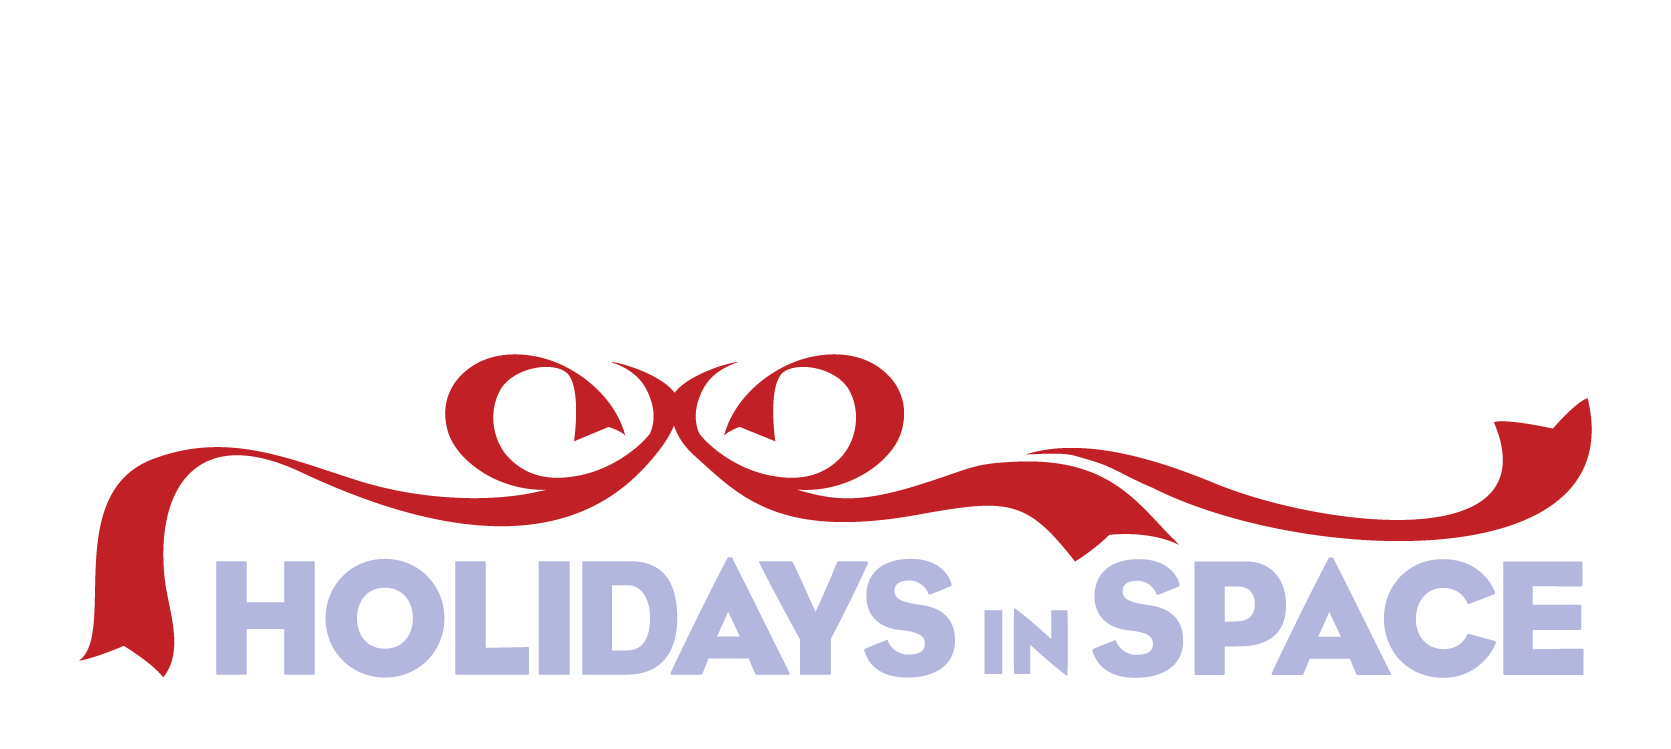 Holidays in Space